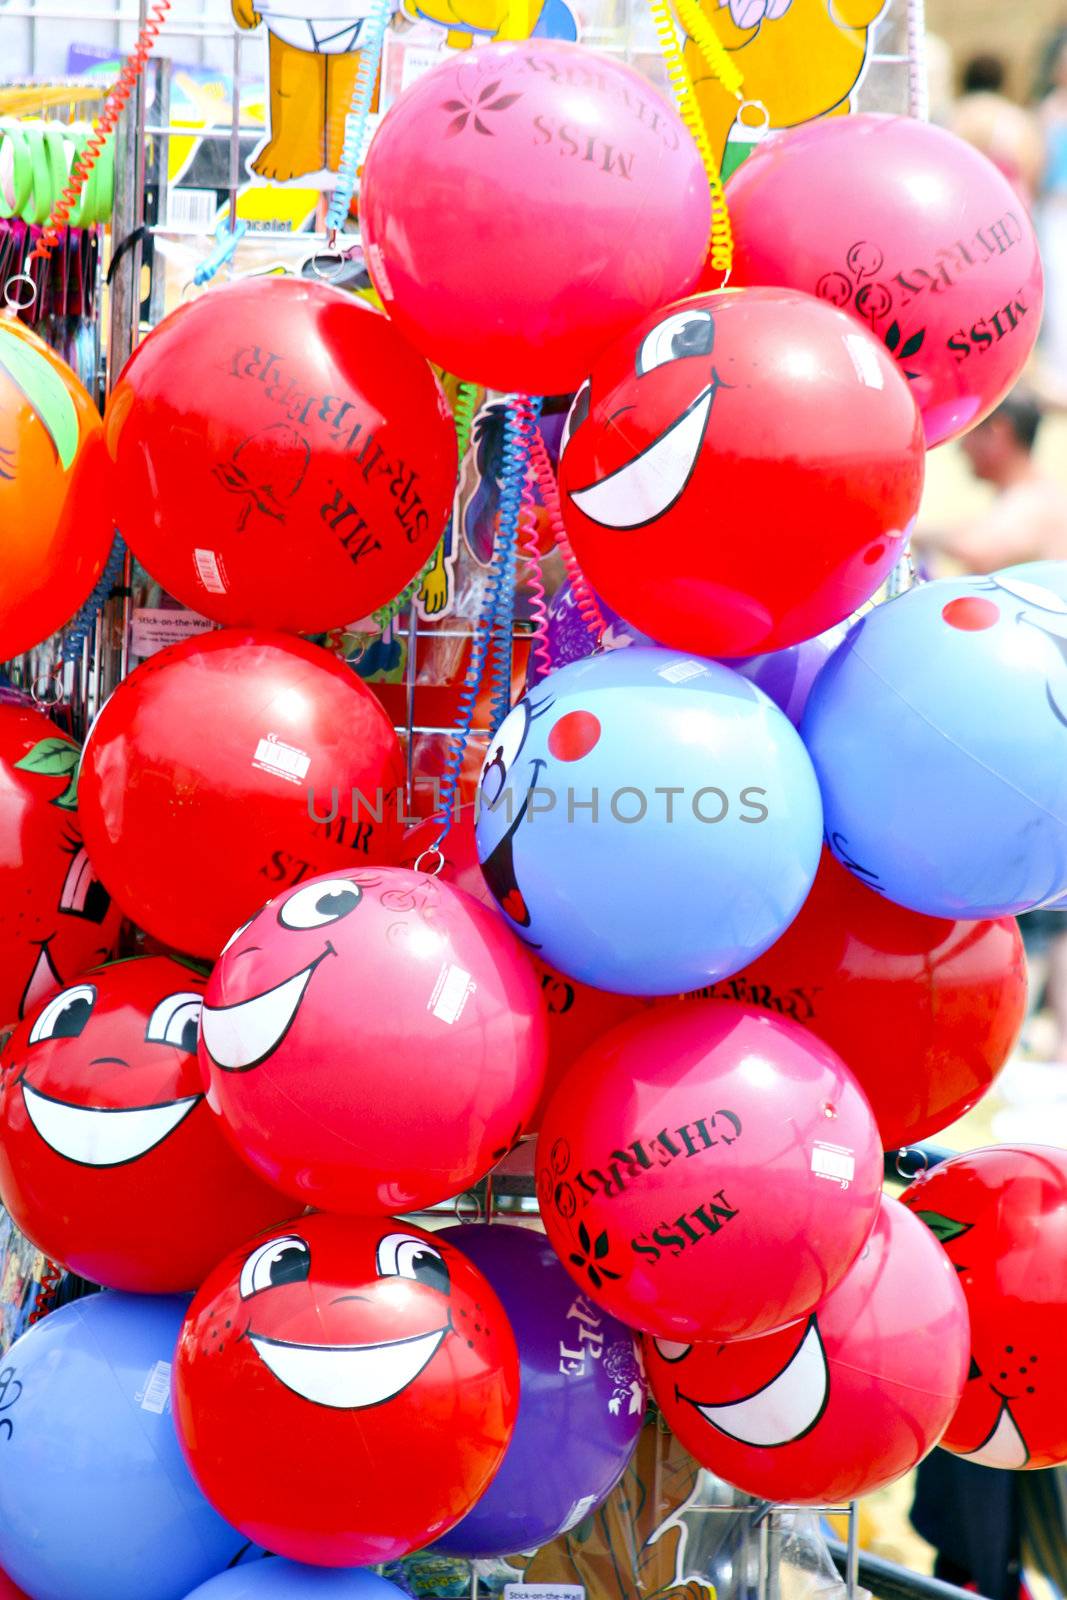 A big bunch of happy balloons